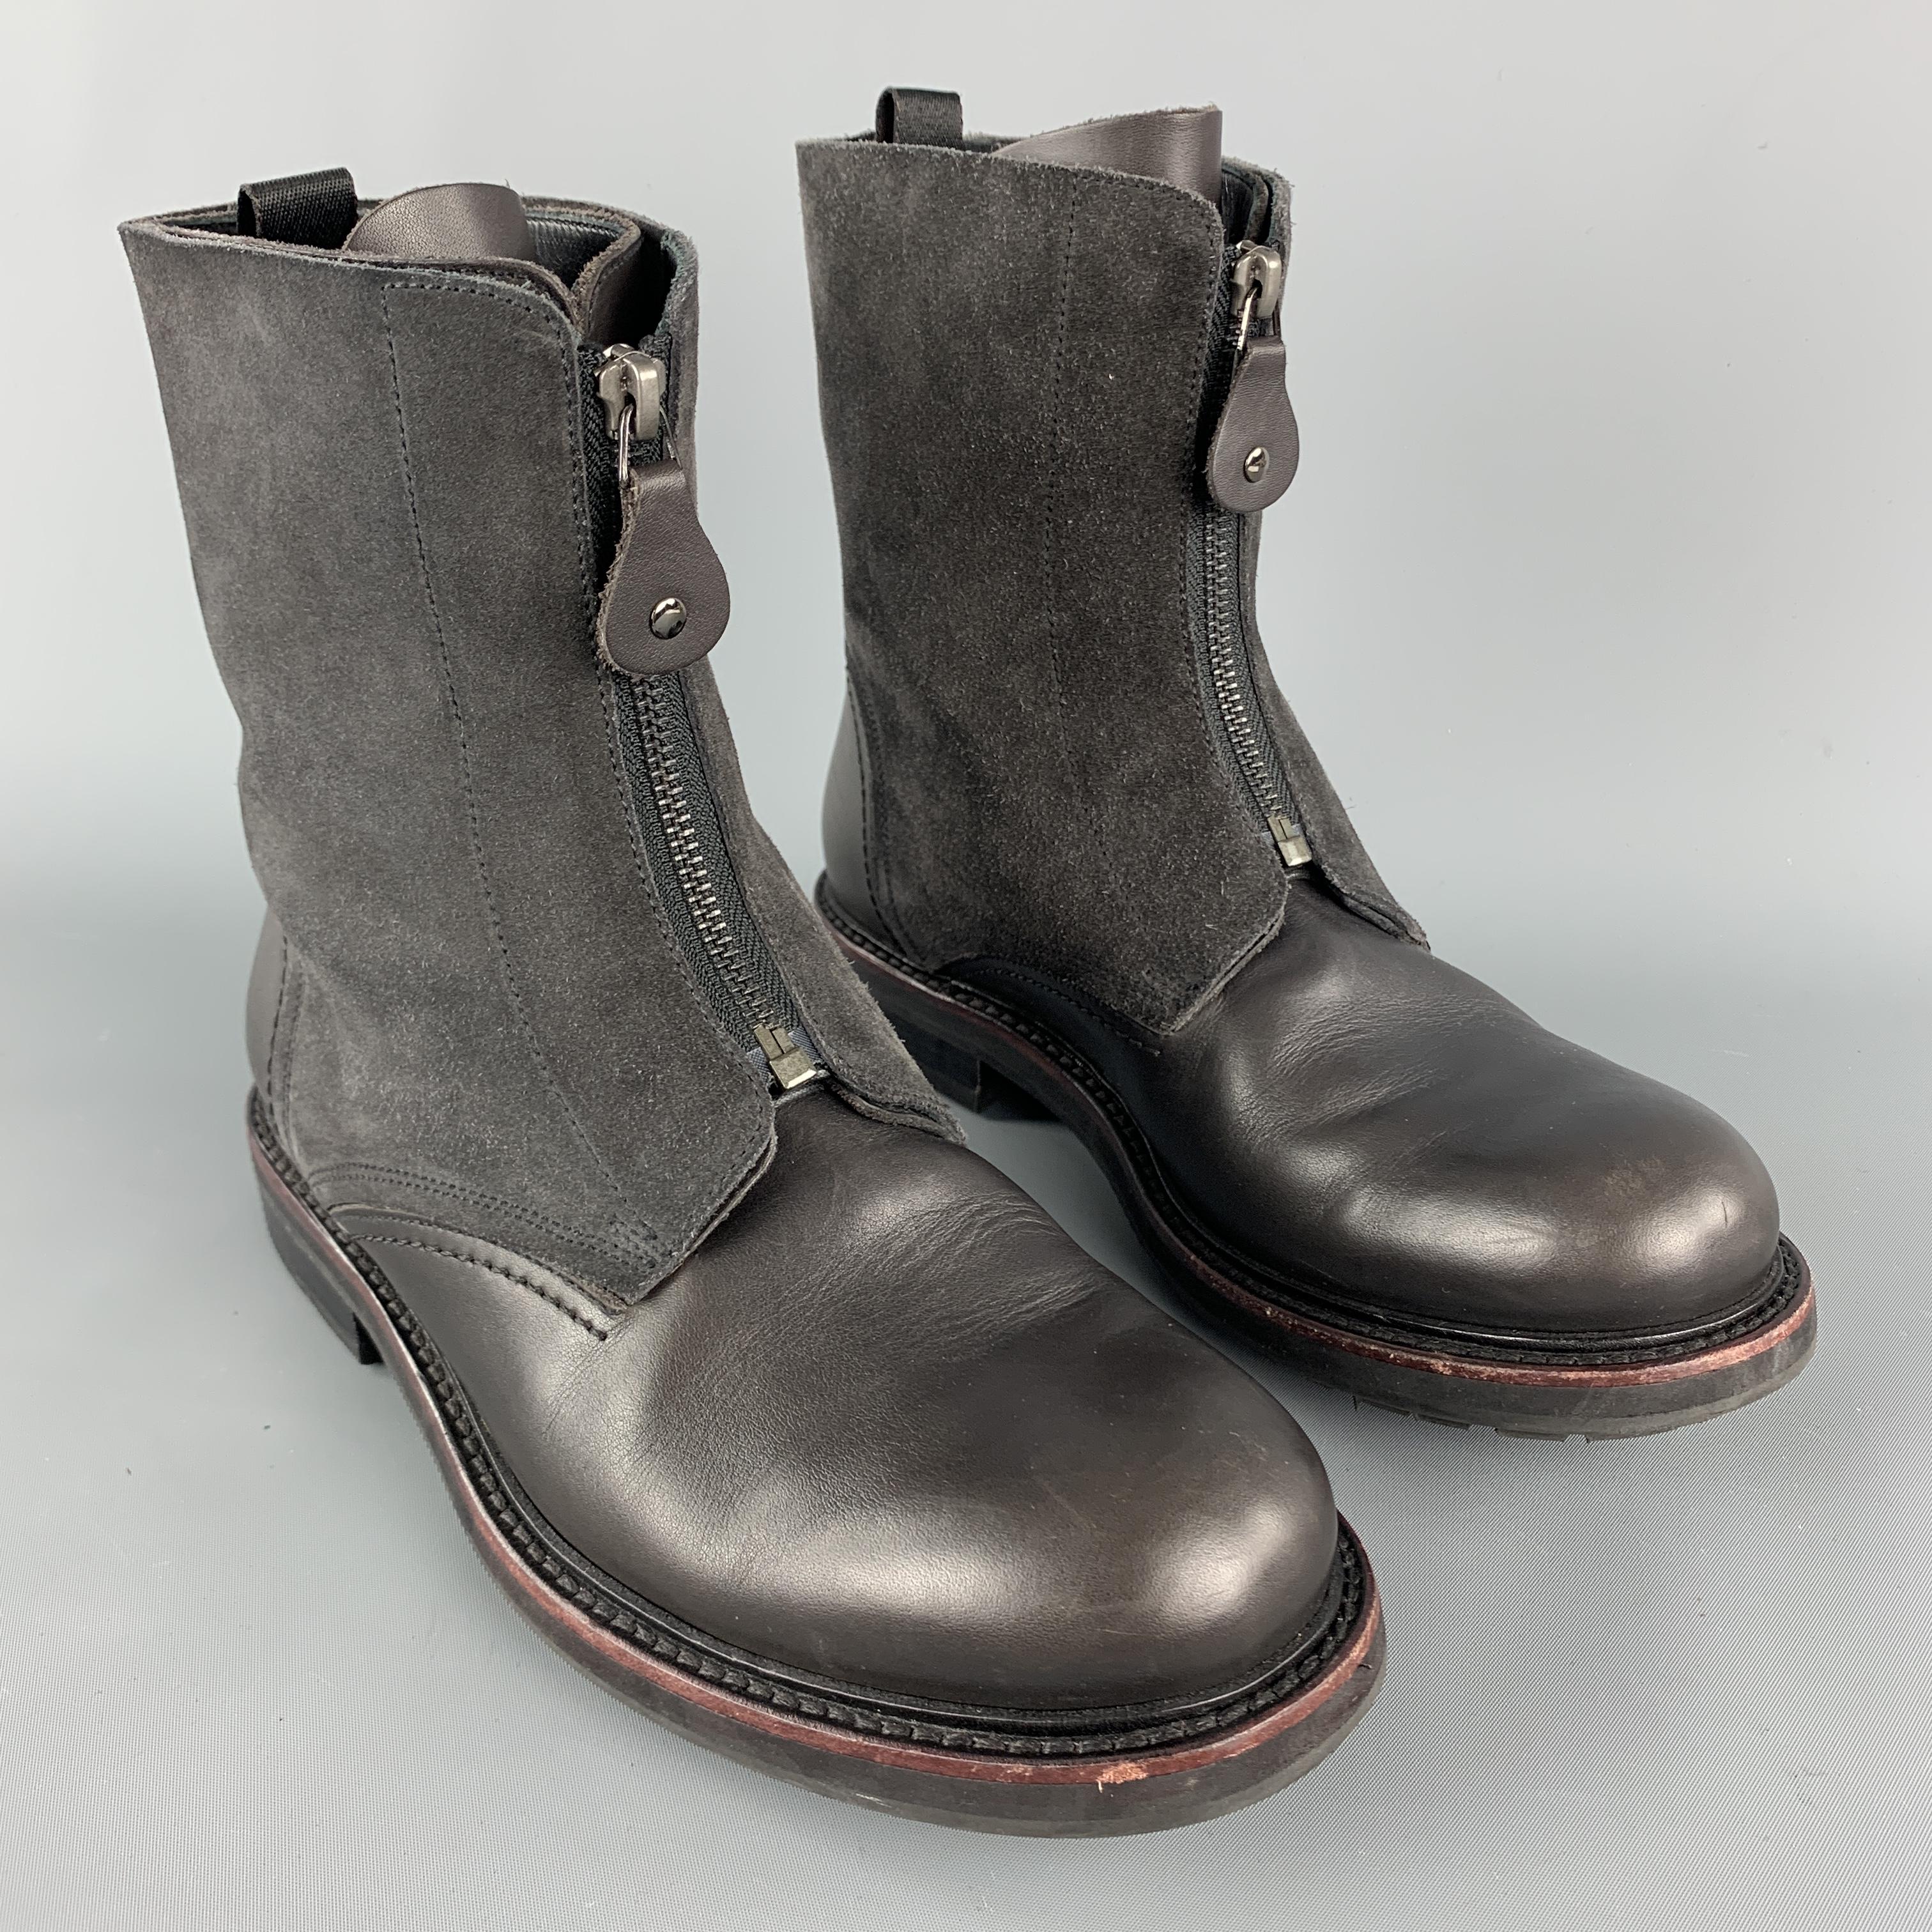 EMPORIO ARMANI Ankle Boots comes in solid charcoal and burgundy leather material, featuring a suede trim, a zip closure, lace up. With Box. Made in Italy. 

Excellent Pre-Owned Condition.
Marked: 7

Measurements:

Heel: 1 in
Outsole: 11.5 x 4 in.